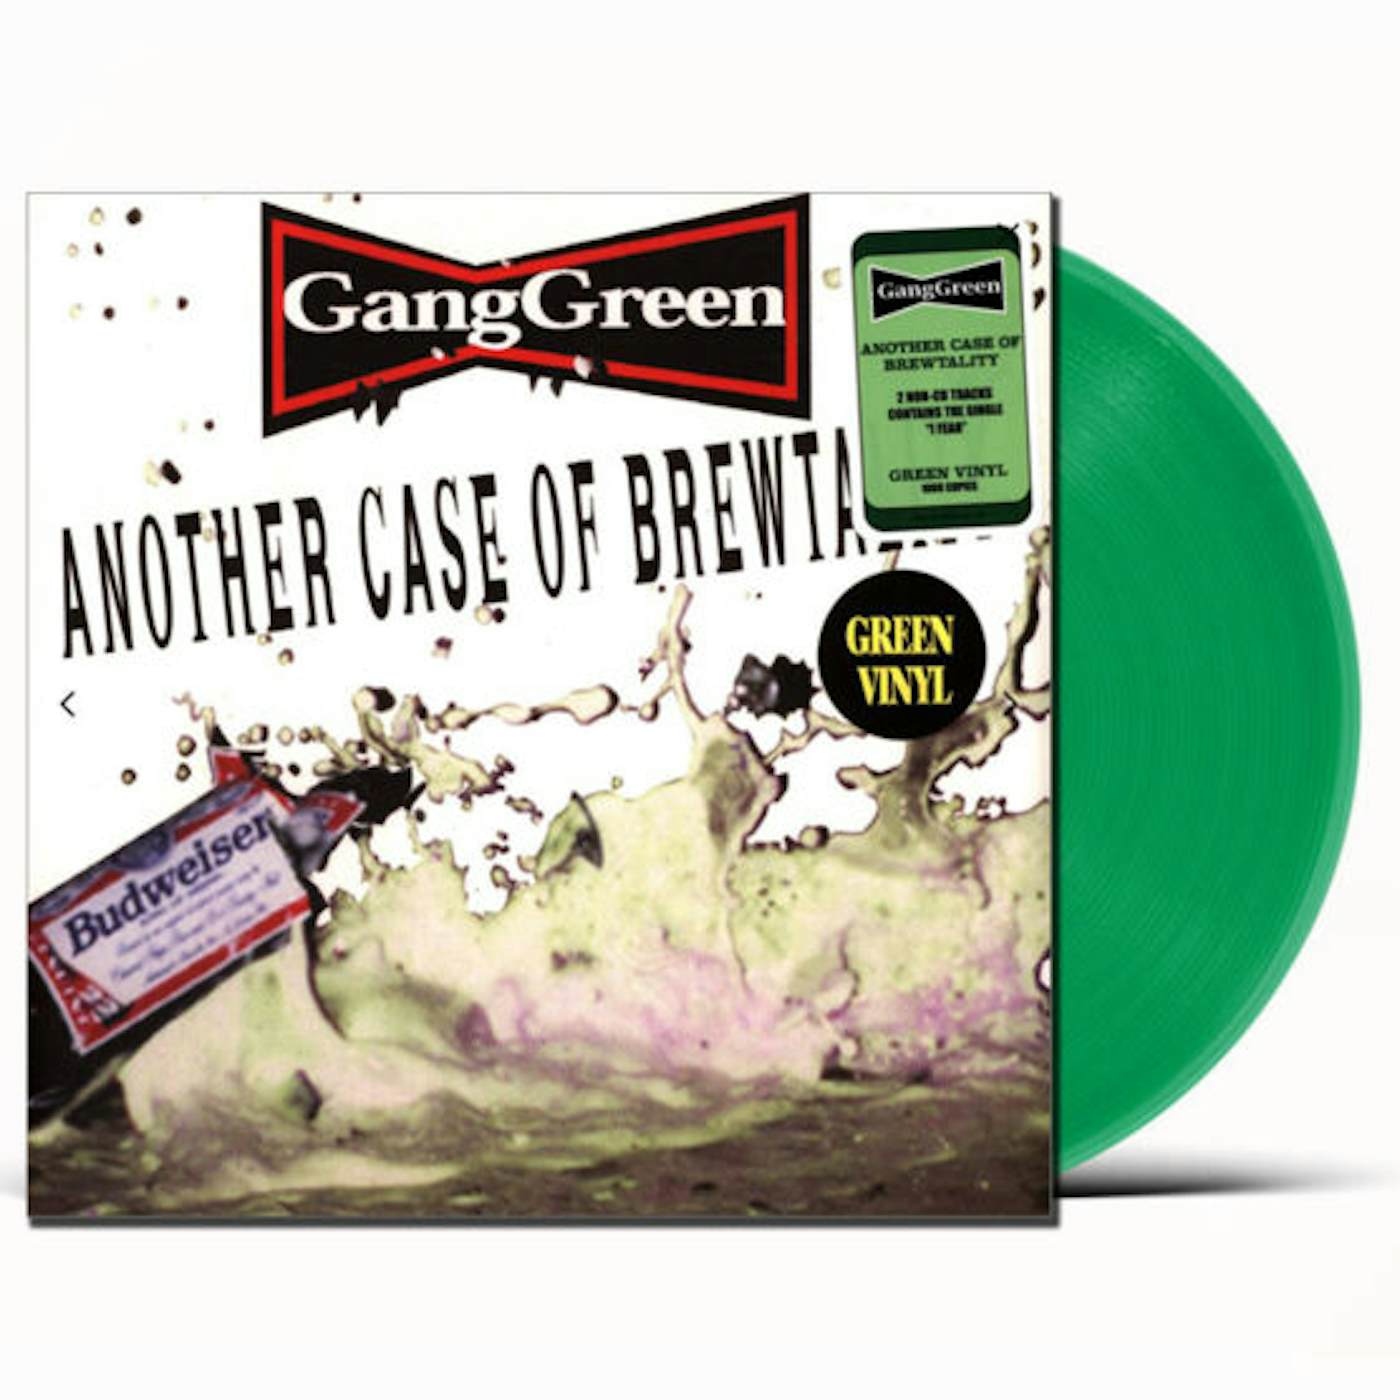 Gang Green ANOTHER CASE OF BREWTALITY Vinyl Record